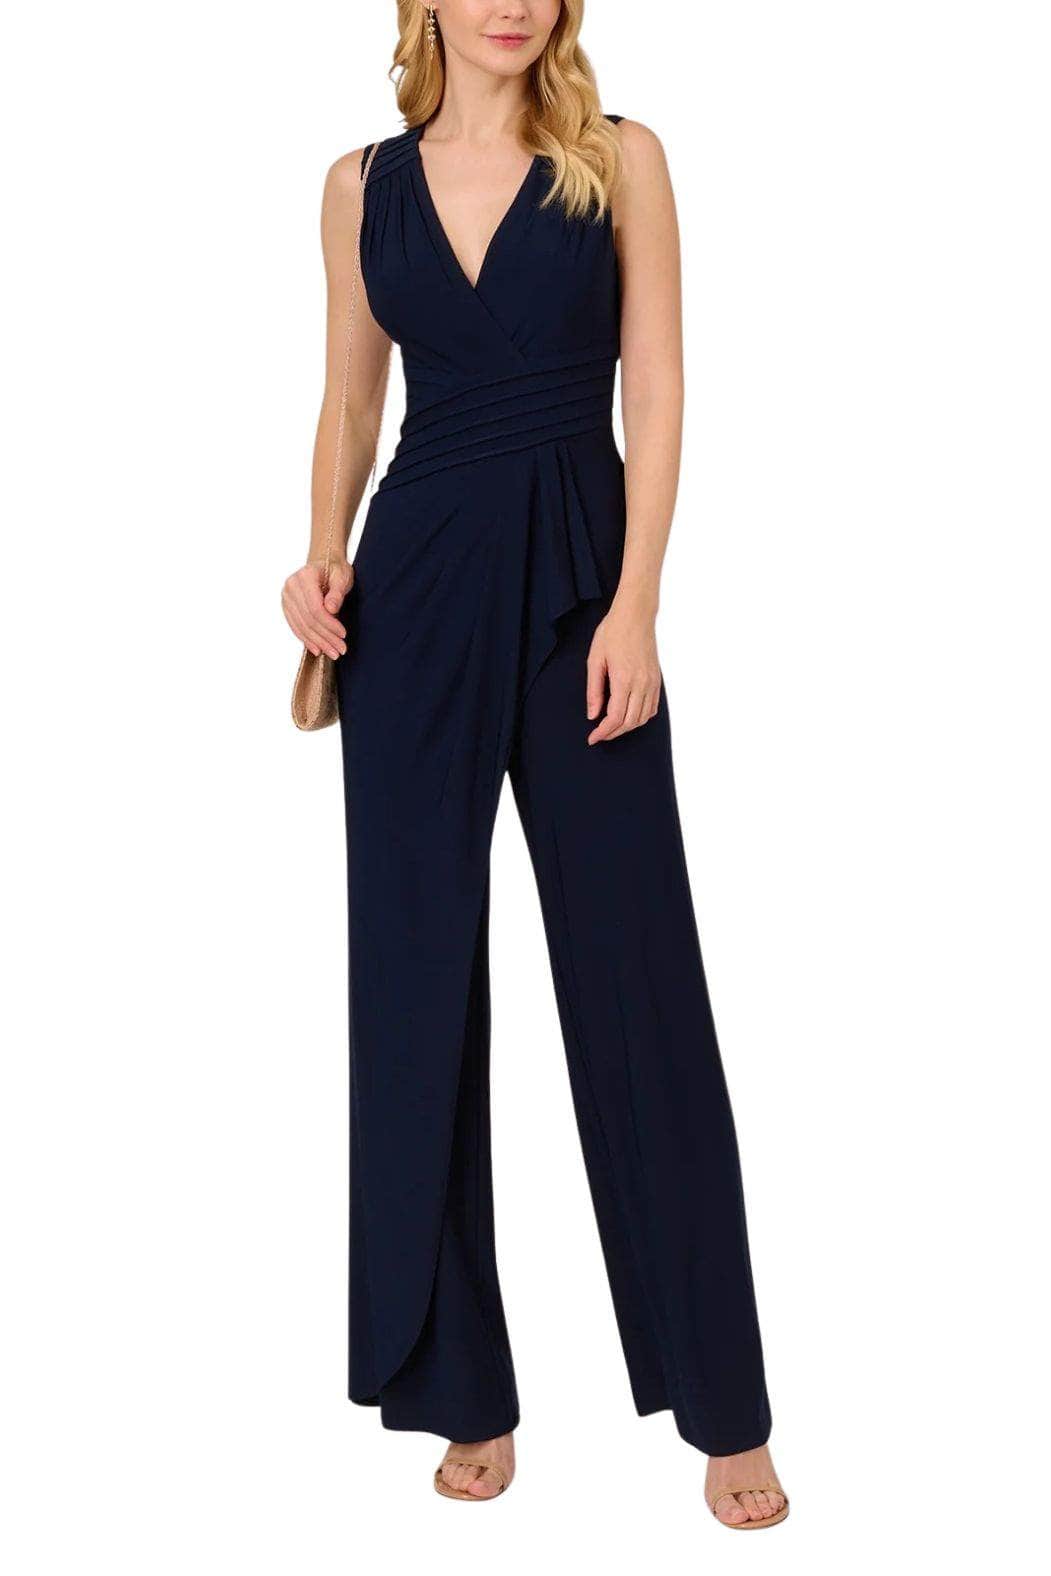 Image of Adrianna Papell AP1D105225 - Sleeveless V-Neck Jumpsuit